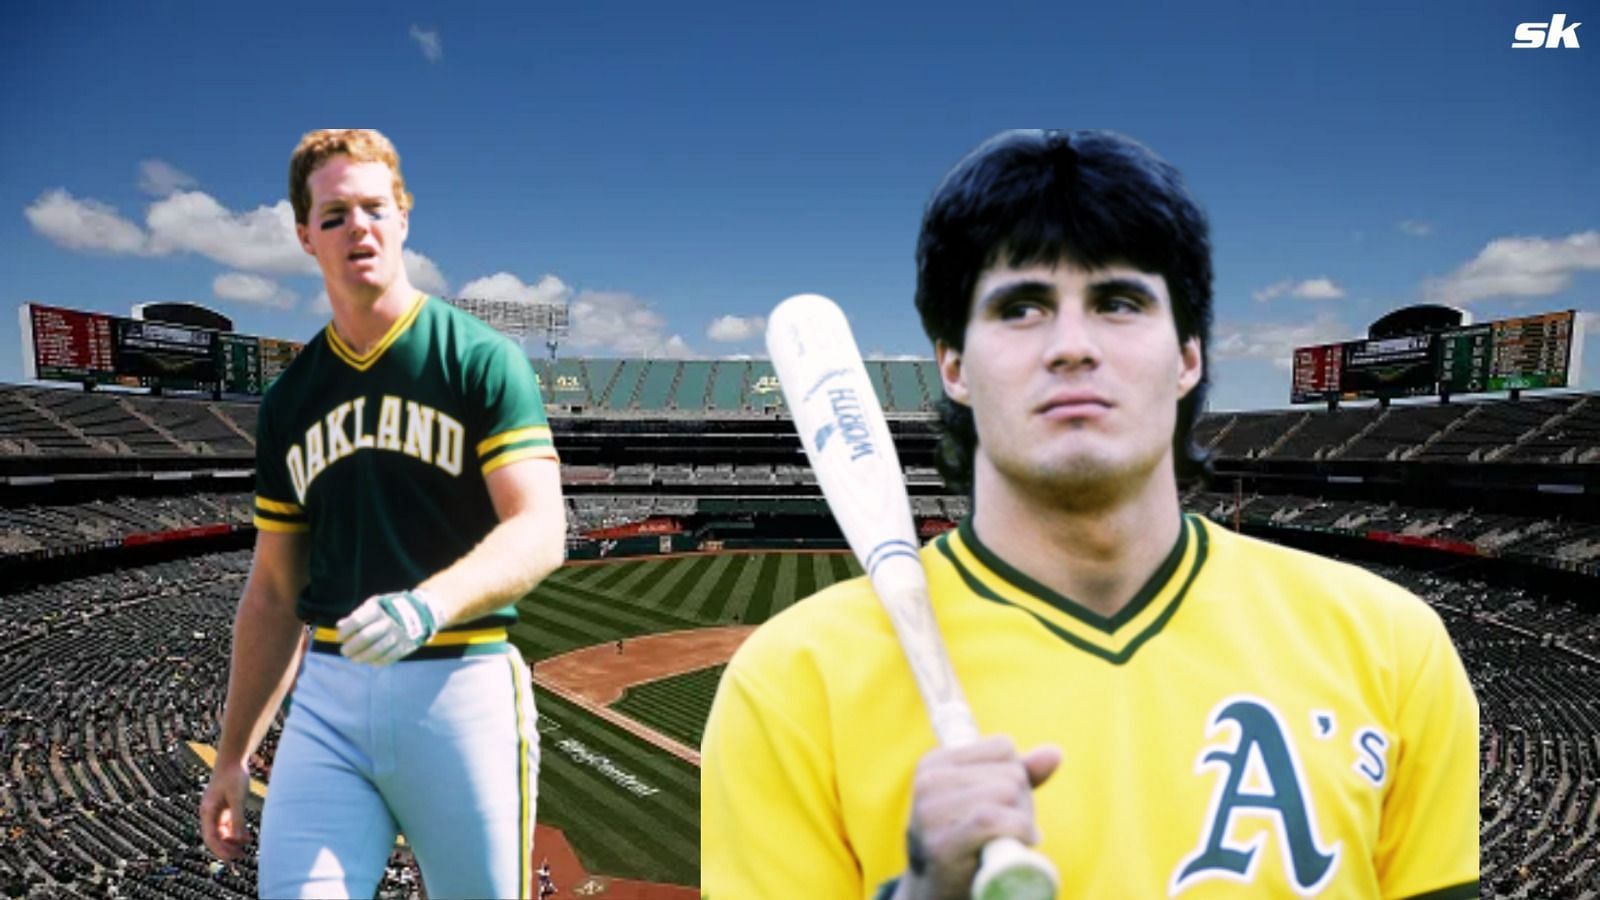 Jose Canseco  Jose canseco, Mlb the show, Oakland athletics